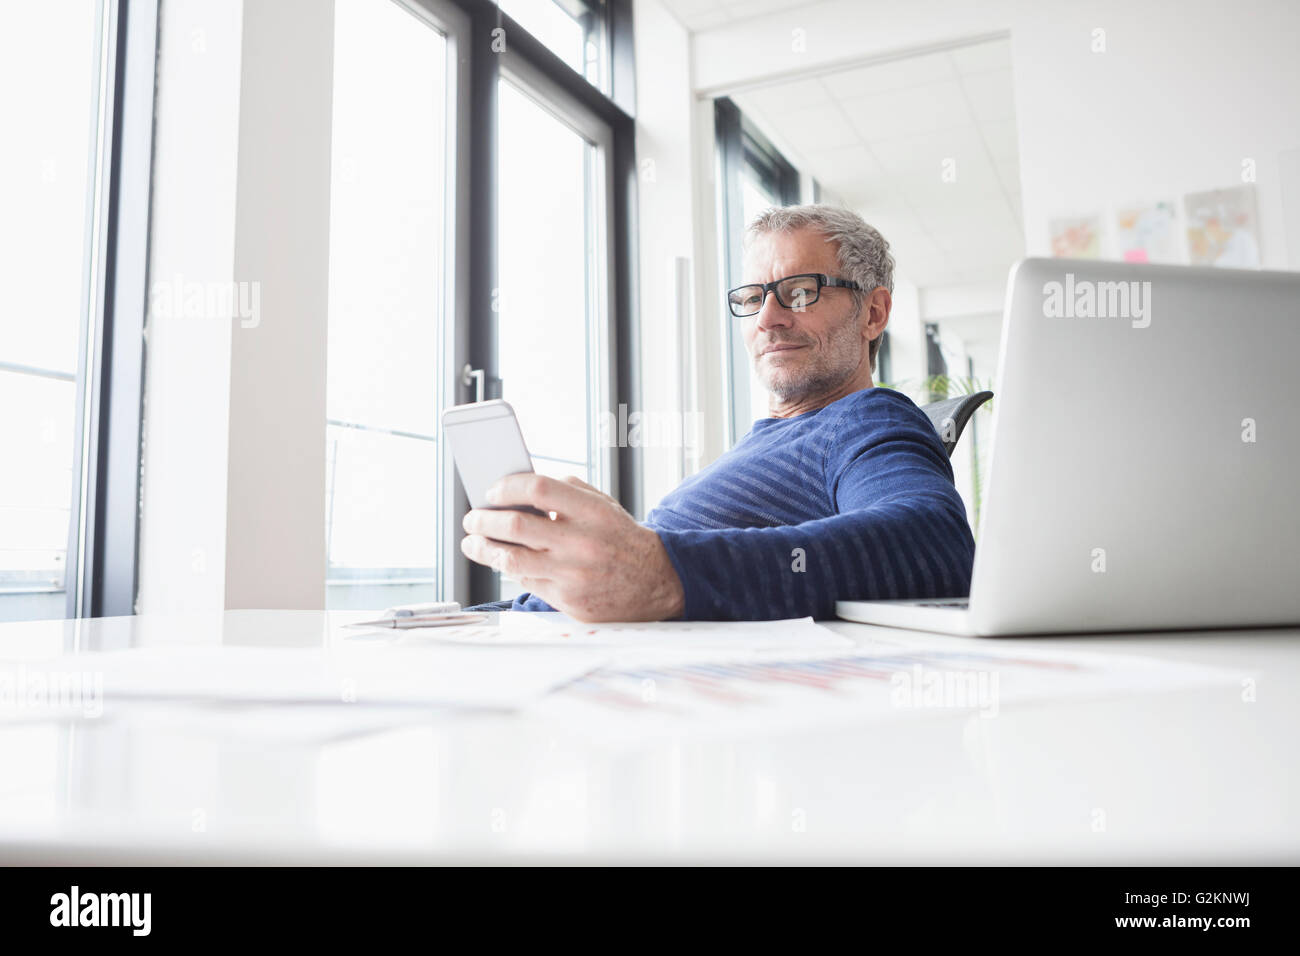 Mature man sitting in office with laptop, using smart phone Stock Photo